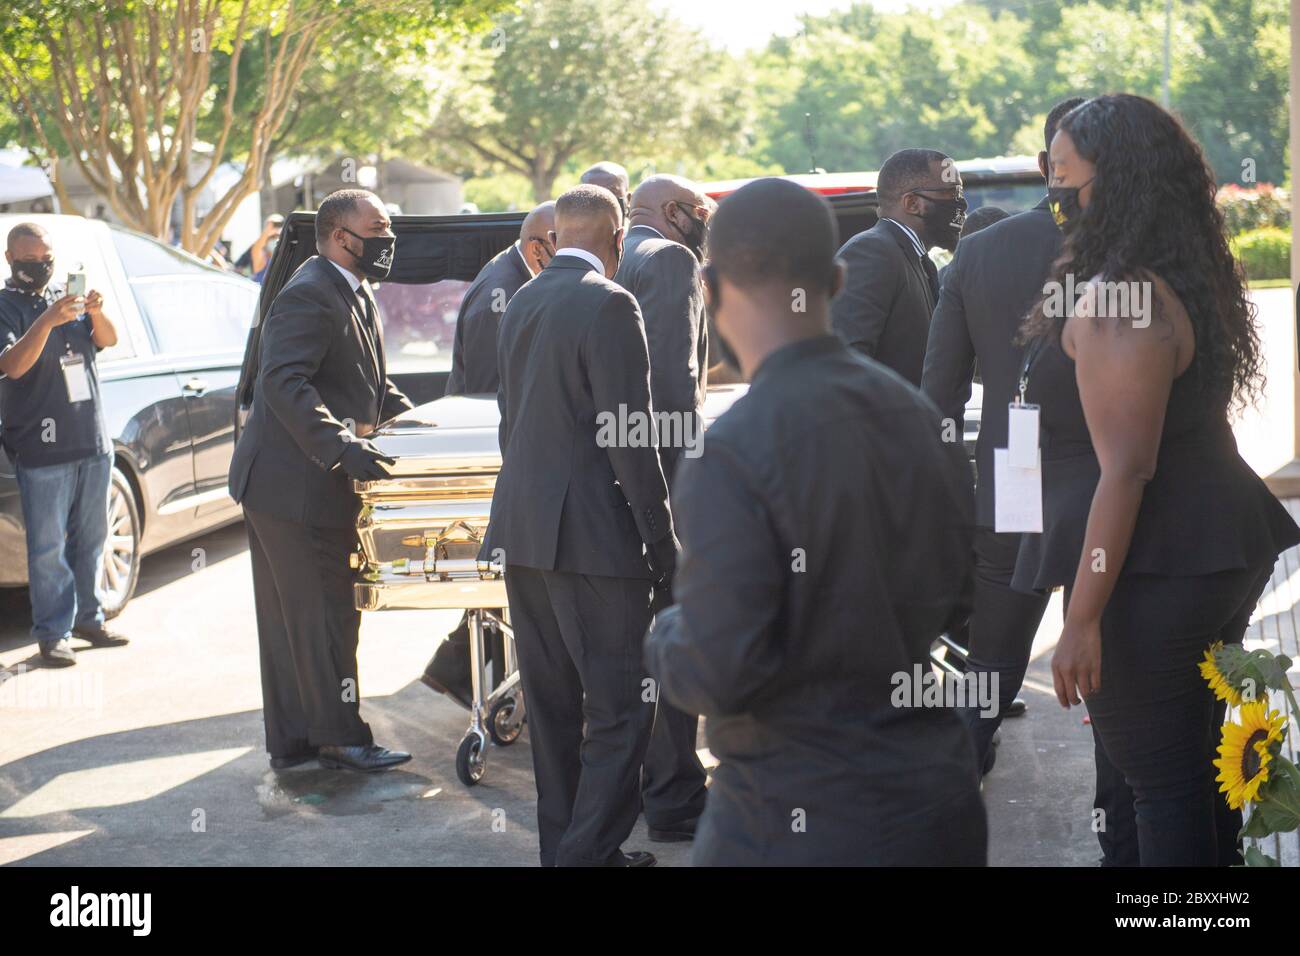 The casket of GEORGE FLOYD arrives at Fountain of Praise Church in Houston for the first of two memorial services before his burial on Tuesday. Floyd's death in Minneapolis two weeks ago at the hands of a white policeman has spawned hundreds of anti-racism protests worldwide. Stock Photo